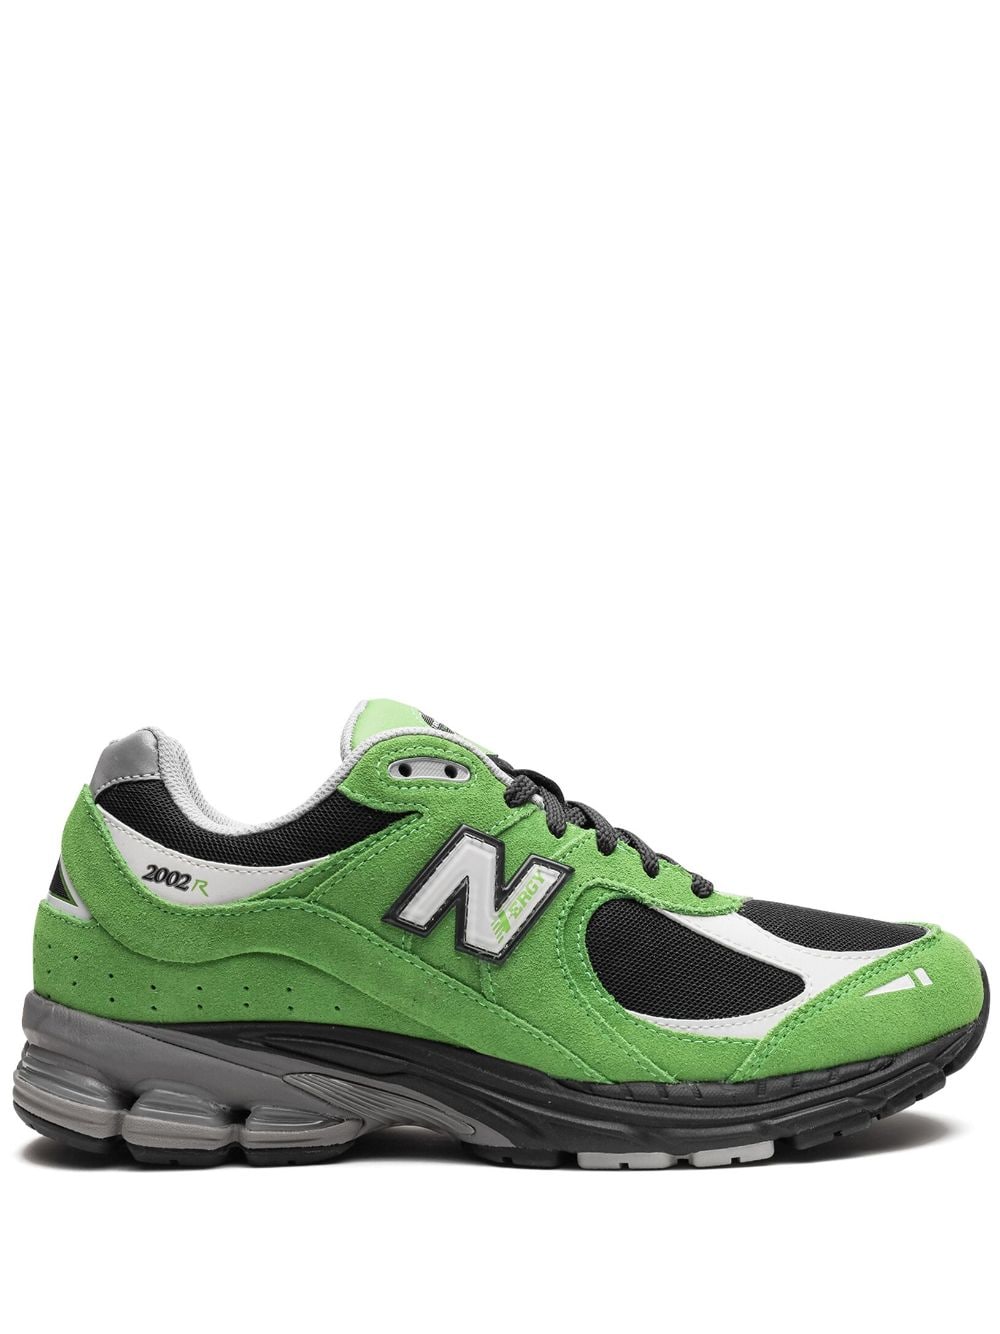 New Balance 2002R "Good Vibes Pack - Green Apple" sneakers